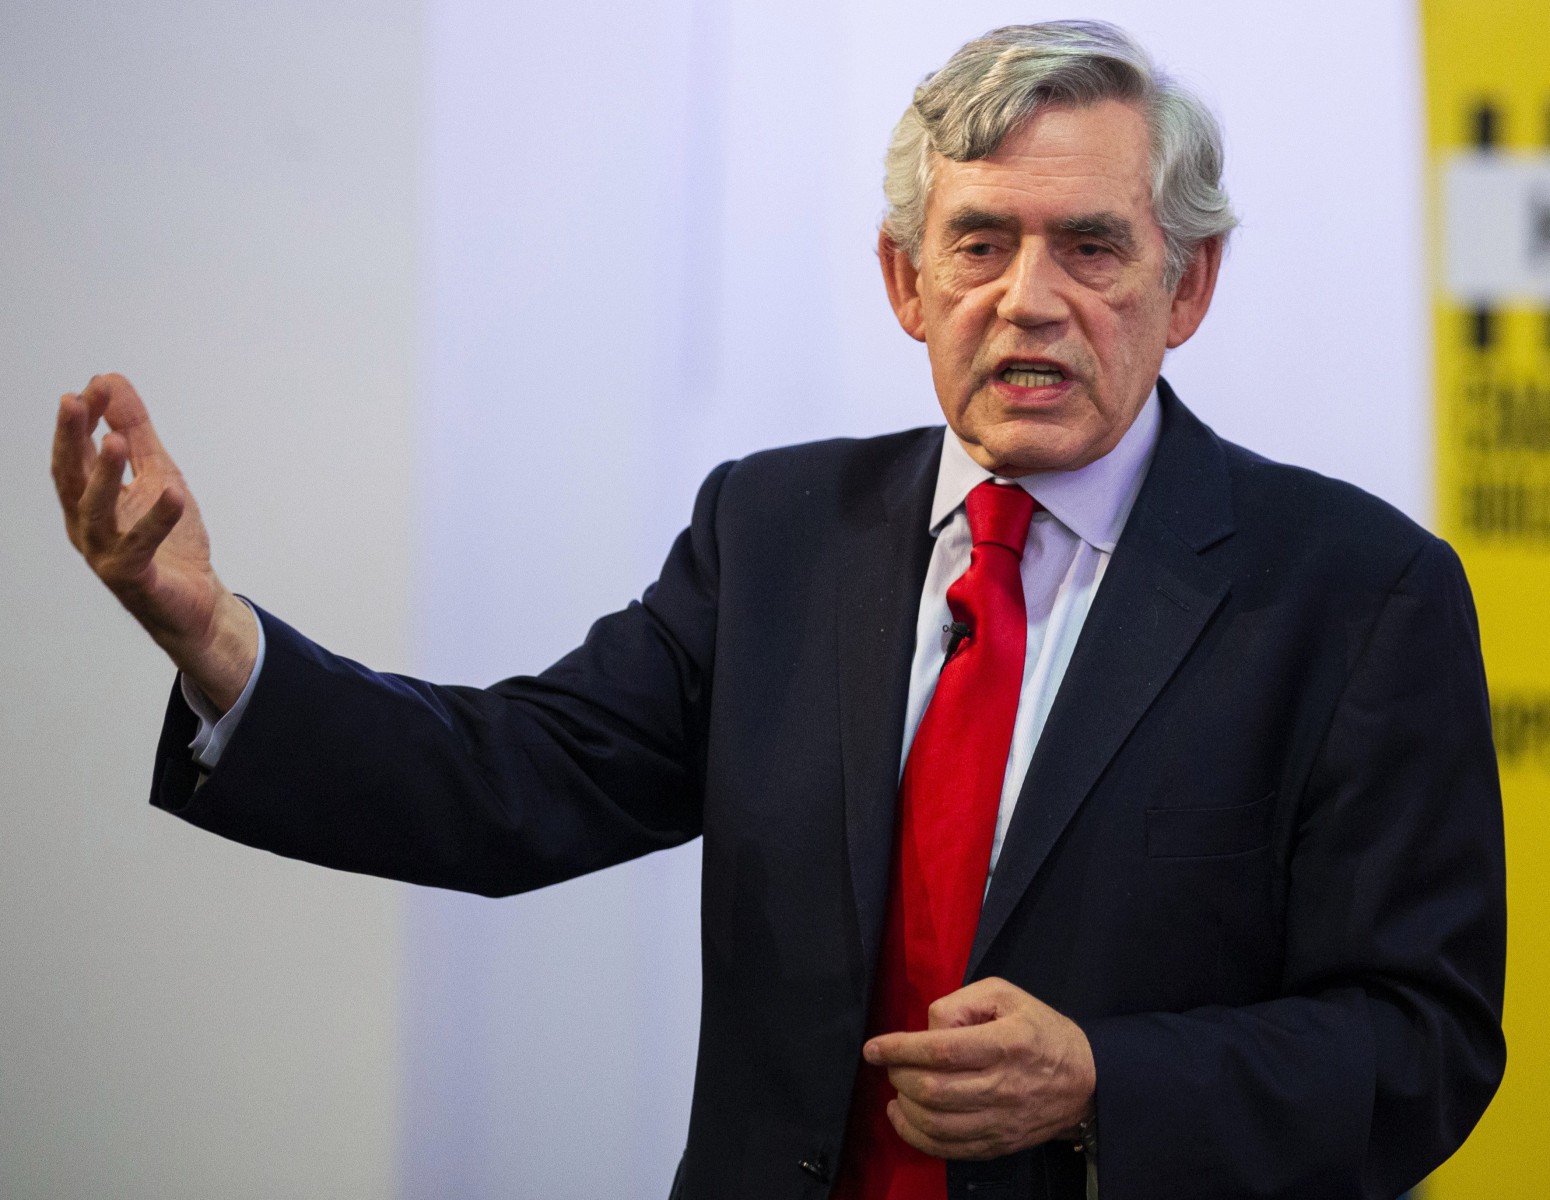 Government spending would have to be increased by 30 per cent to find Labours election pledges - three times more than Gordon Brown splurged after the financial crash